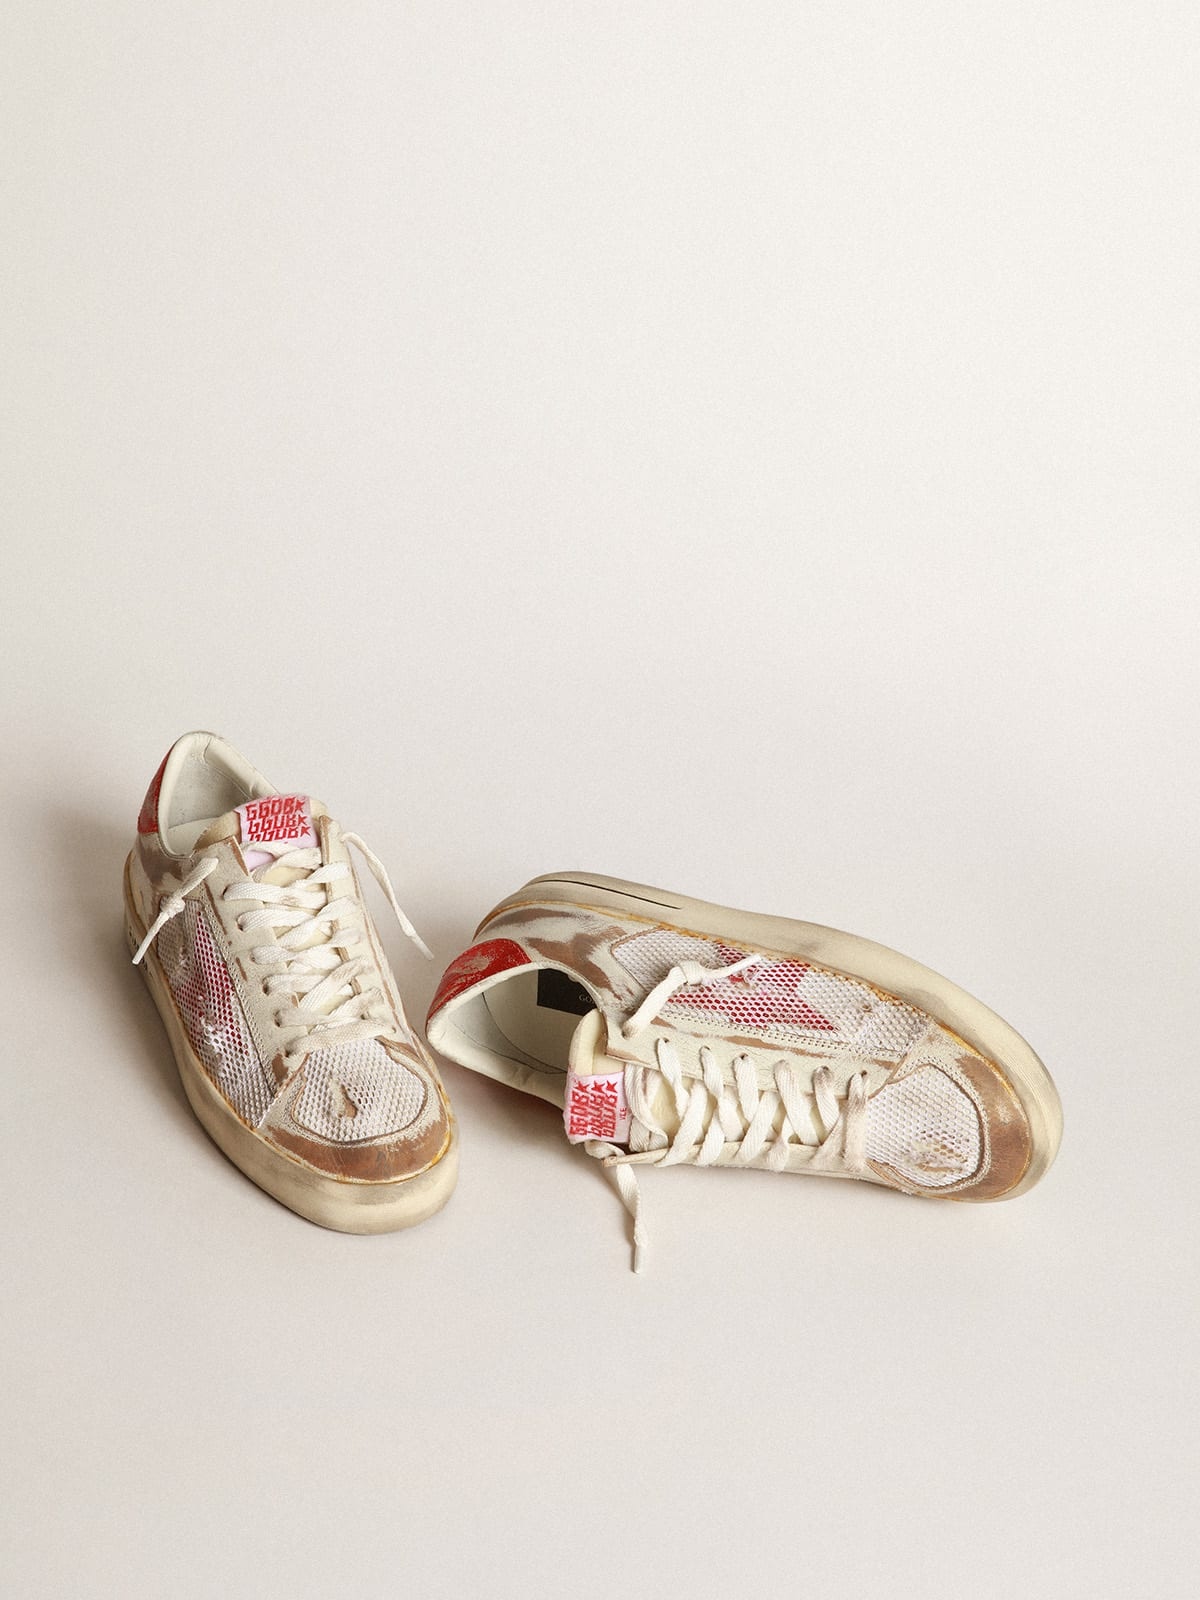 Stardan LAB sneakers in white leather and mesh with red laminated leather star - 2